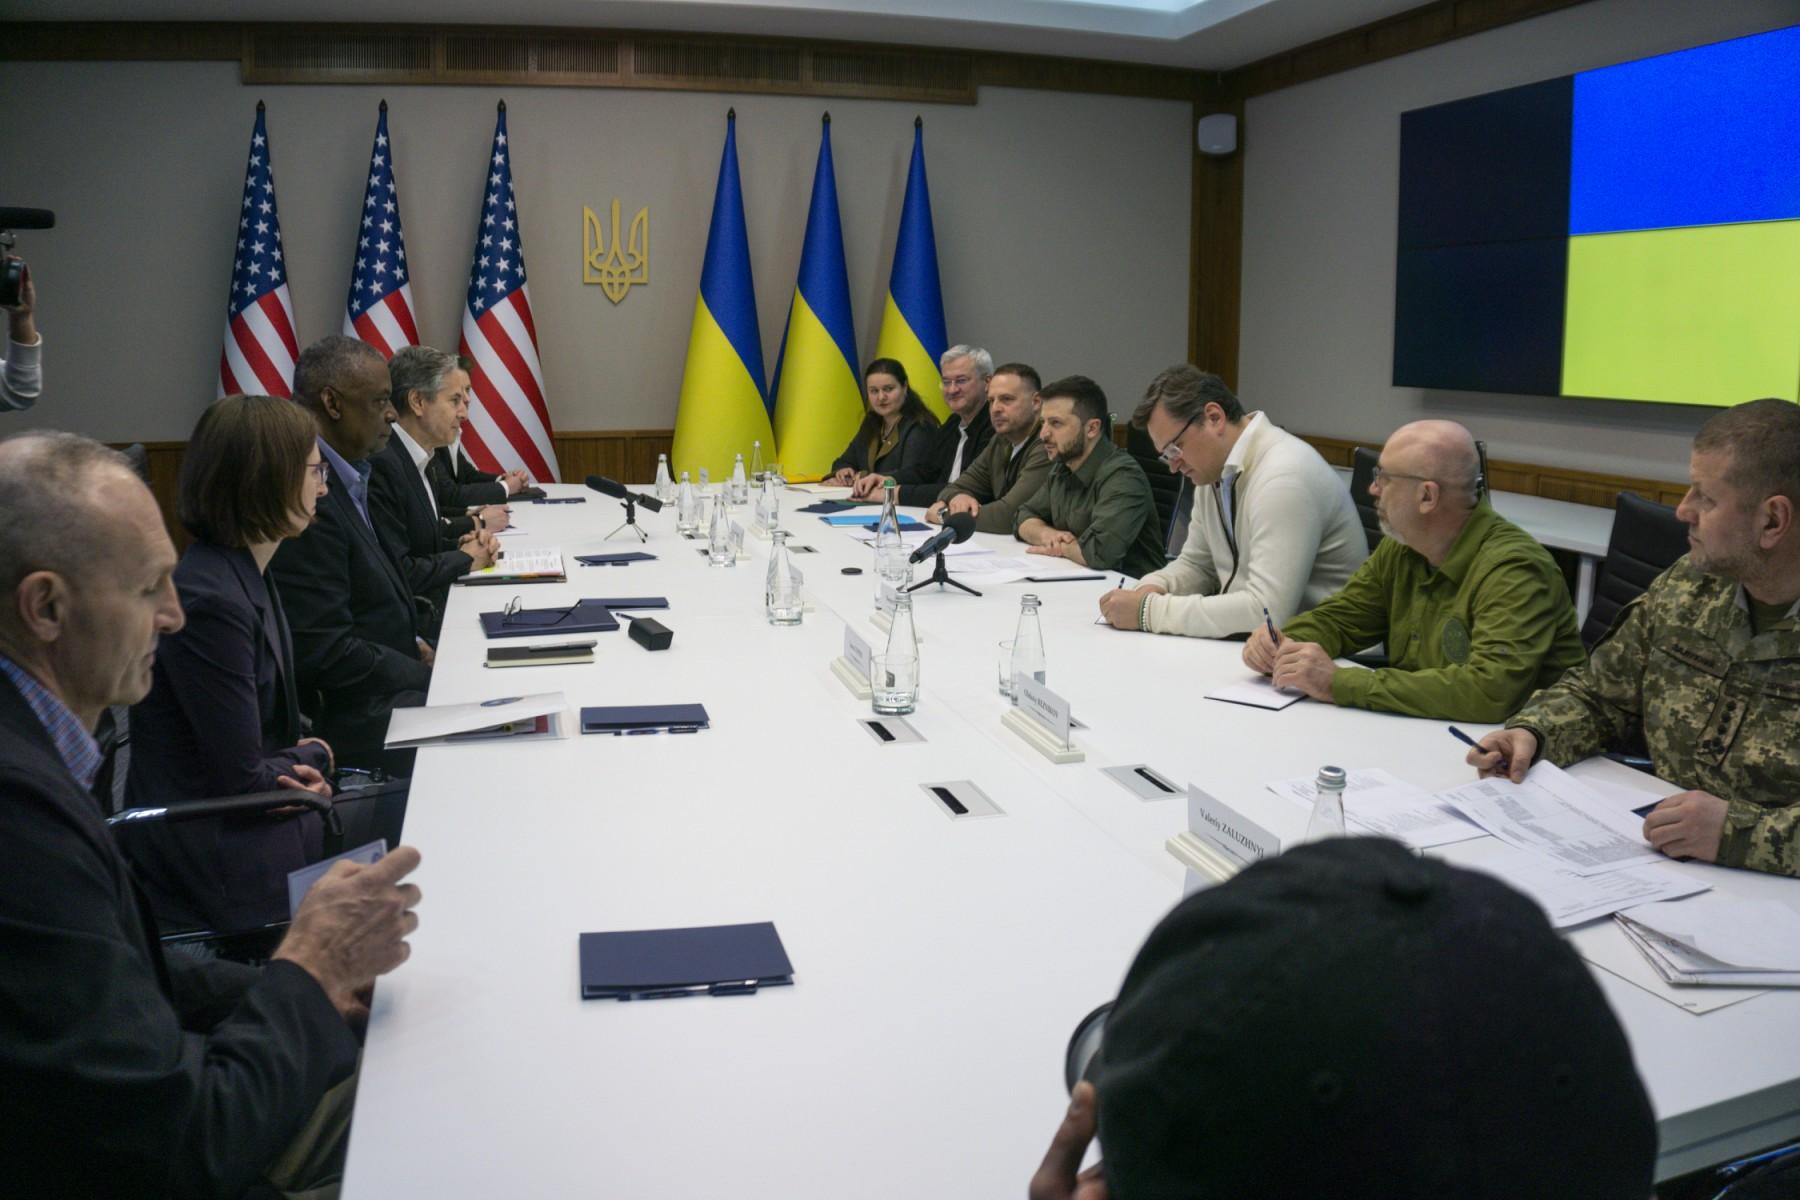 In this image provided by the Department of Defense, Secretary of Defense Lloyd Austin (third left), and Secretary of State Antony Blinken (fourth left), meet with Ukrainian Foreign Minister Dmytro Kuleba (third right) and Ukrainian President Volodymyr Zelensky (fourth right), on April 24 in Kyiv, Ukraine. Photo: AFP